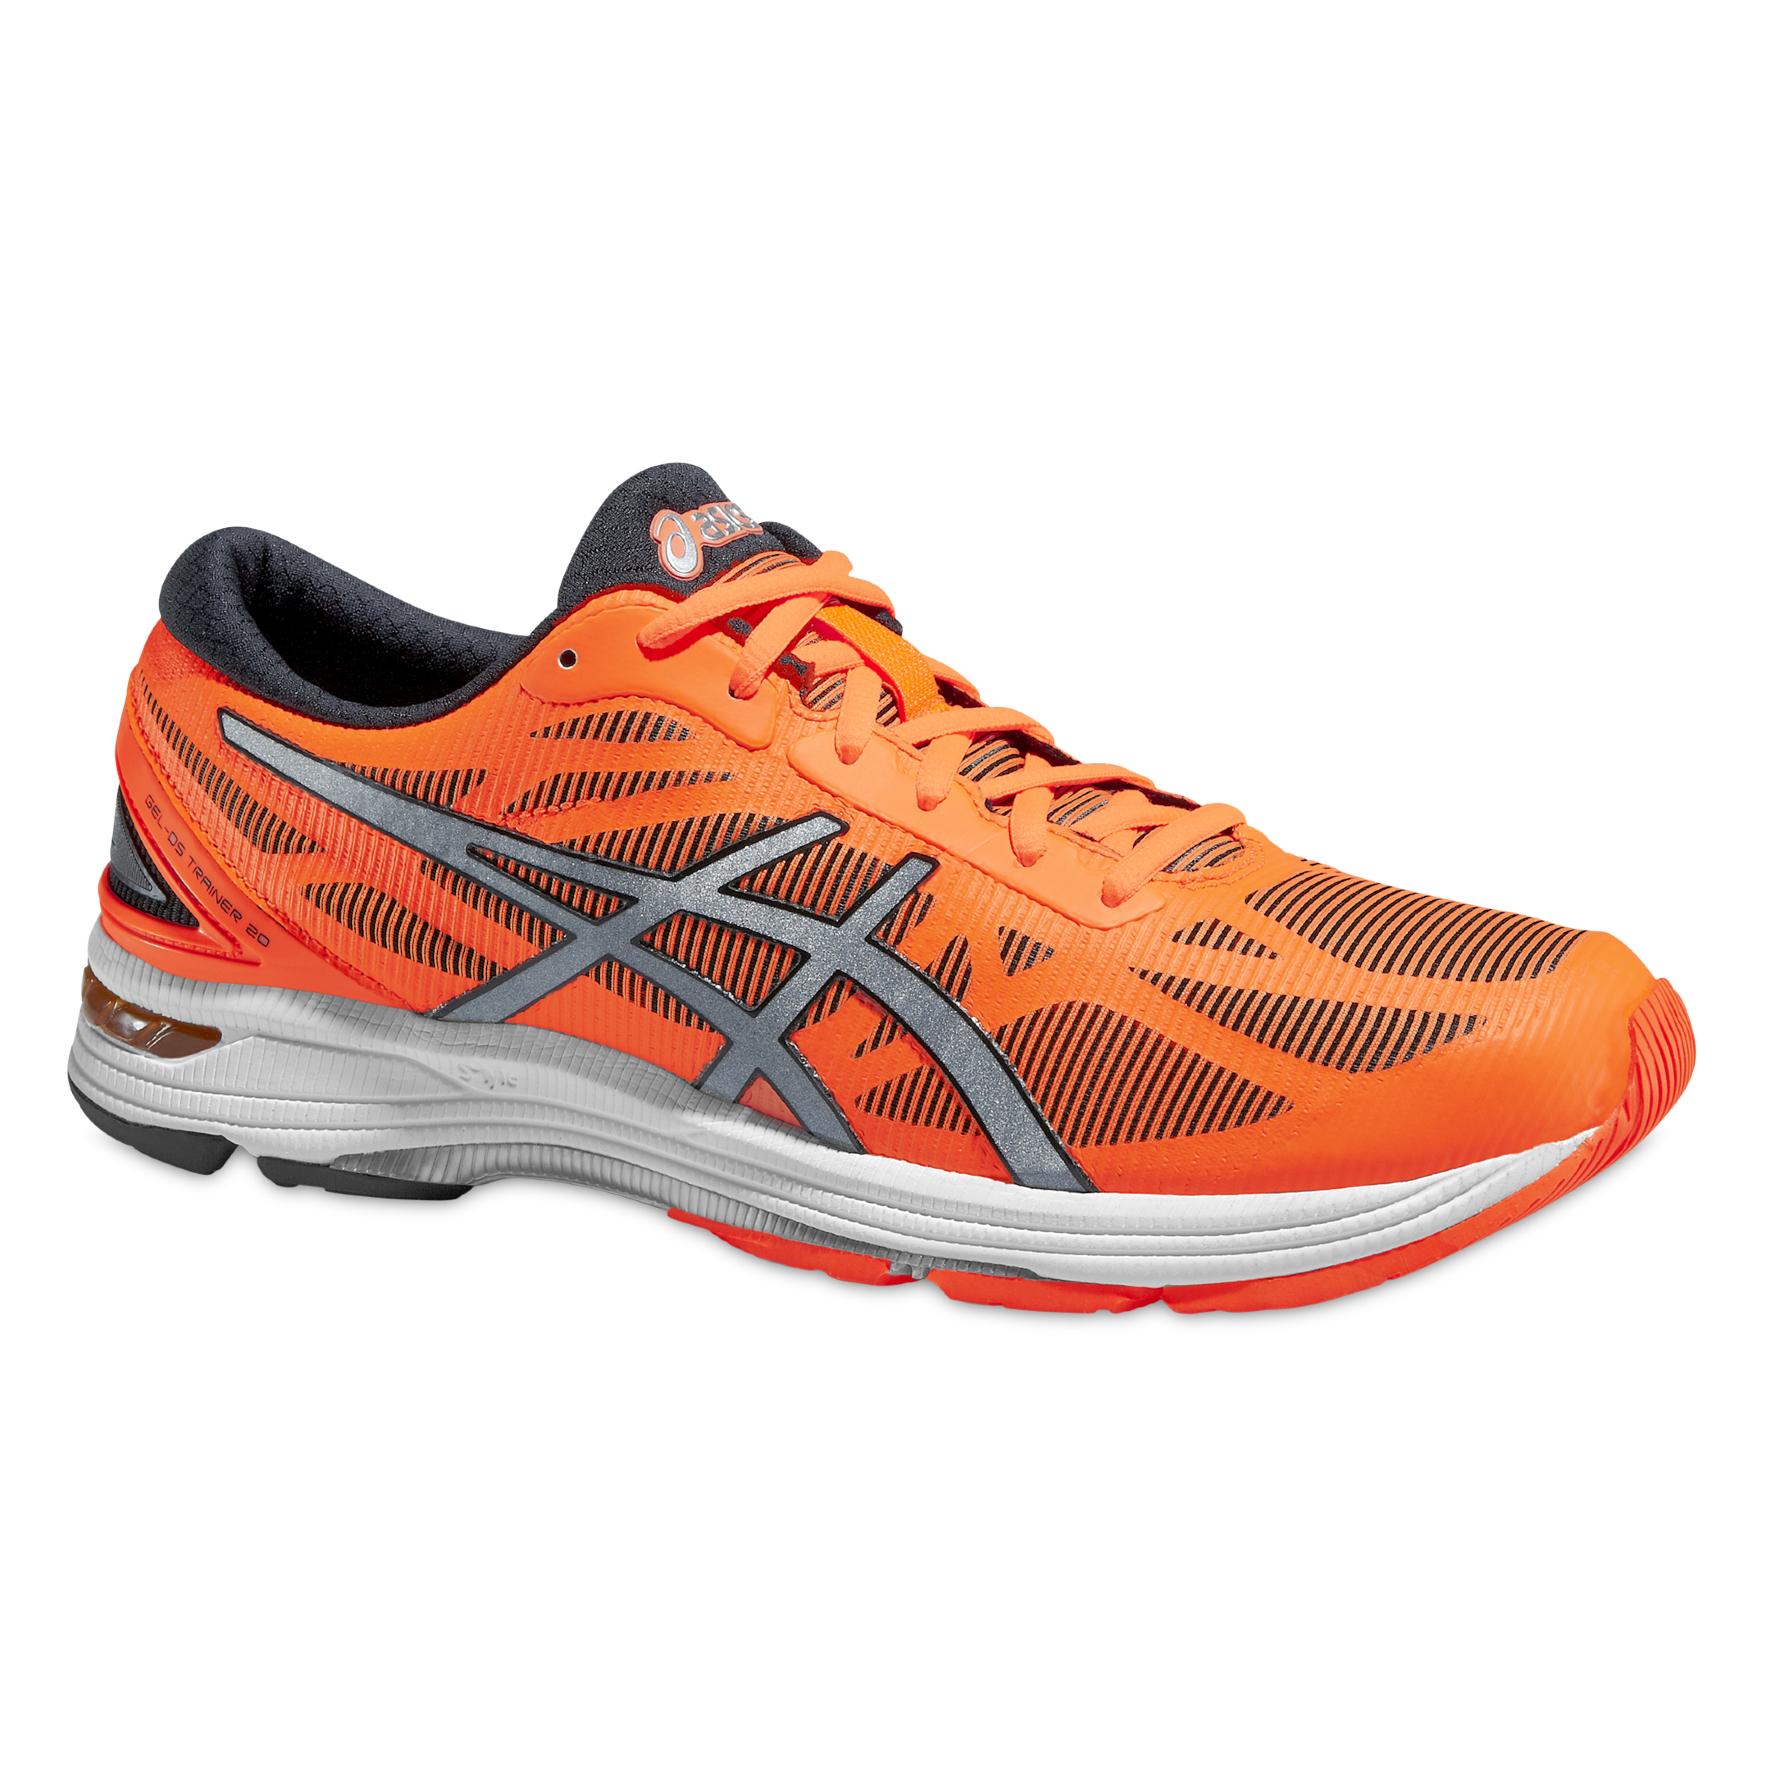 docena protesta evitar ASICS_ZA on Twitter: "ASICS GEL-DS Trainer 20 celebrates its 20th  Anniversary - ideal companion for speed work/tempo runs #BetterYourBest  http://t.co/stm8QZQWIw" / Twitter